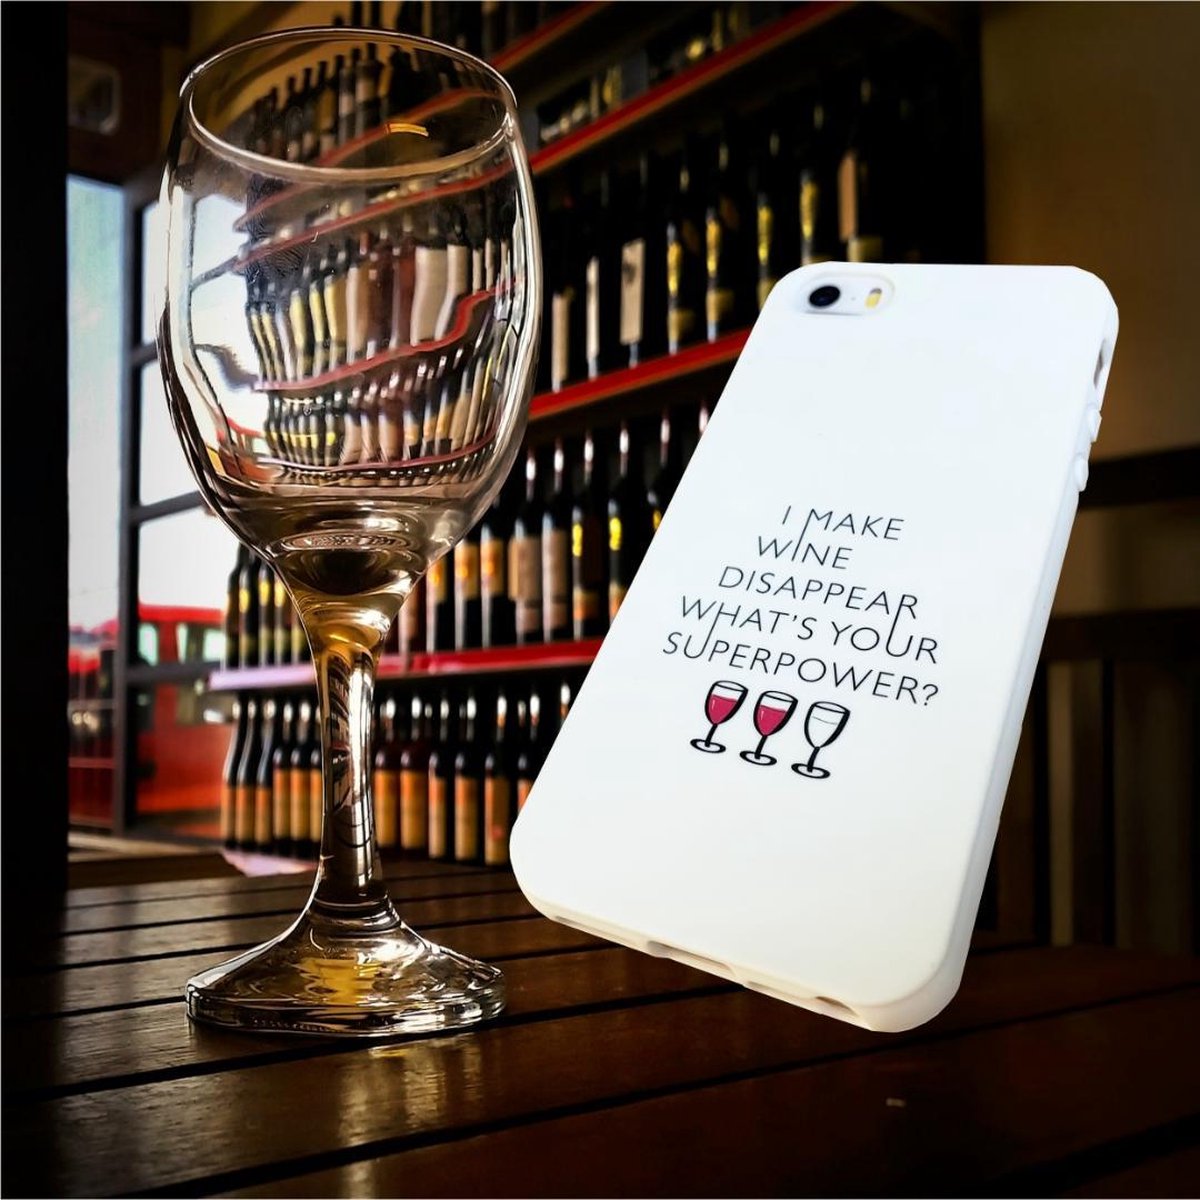 Apple Iphone XR wit siliconen hoesje - I make wine disappear whats your superpower?